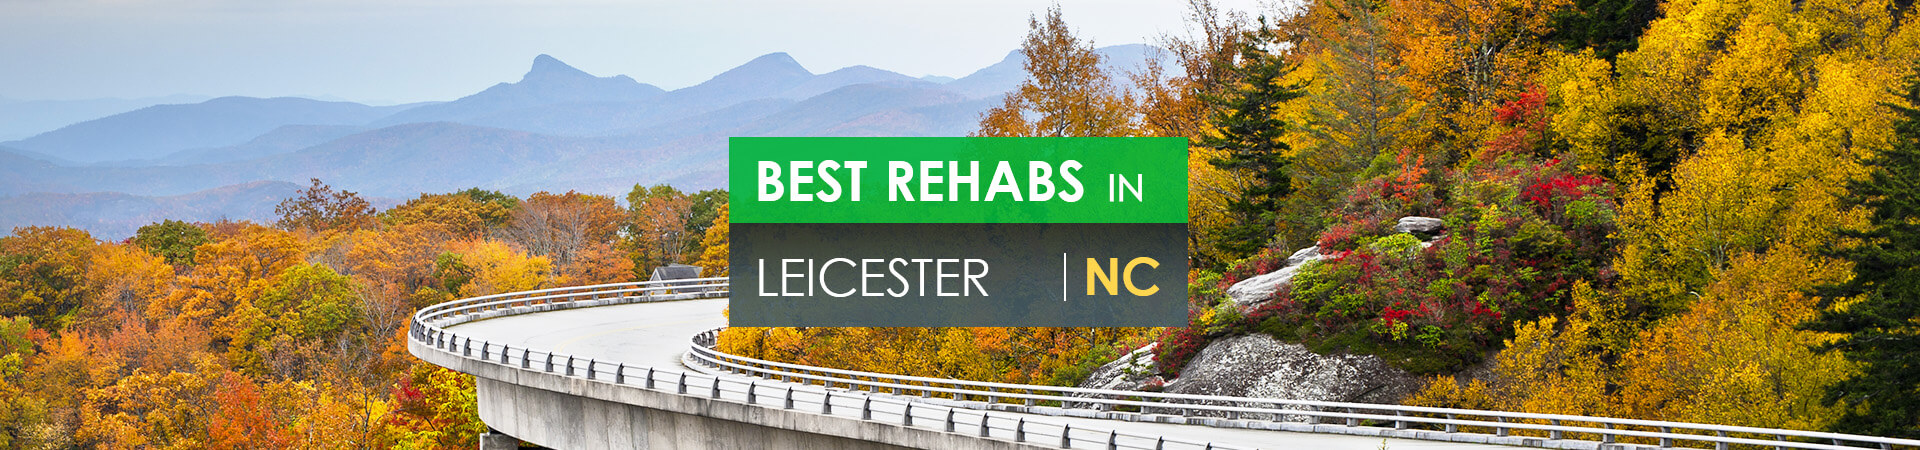 Best rehabs in Leicester, NC